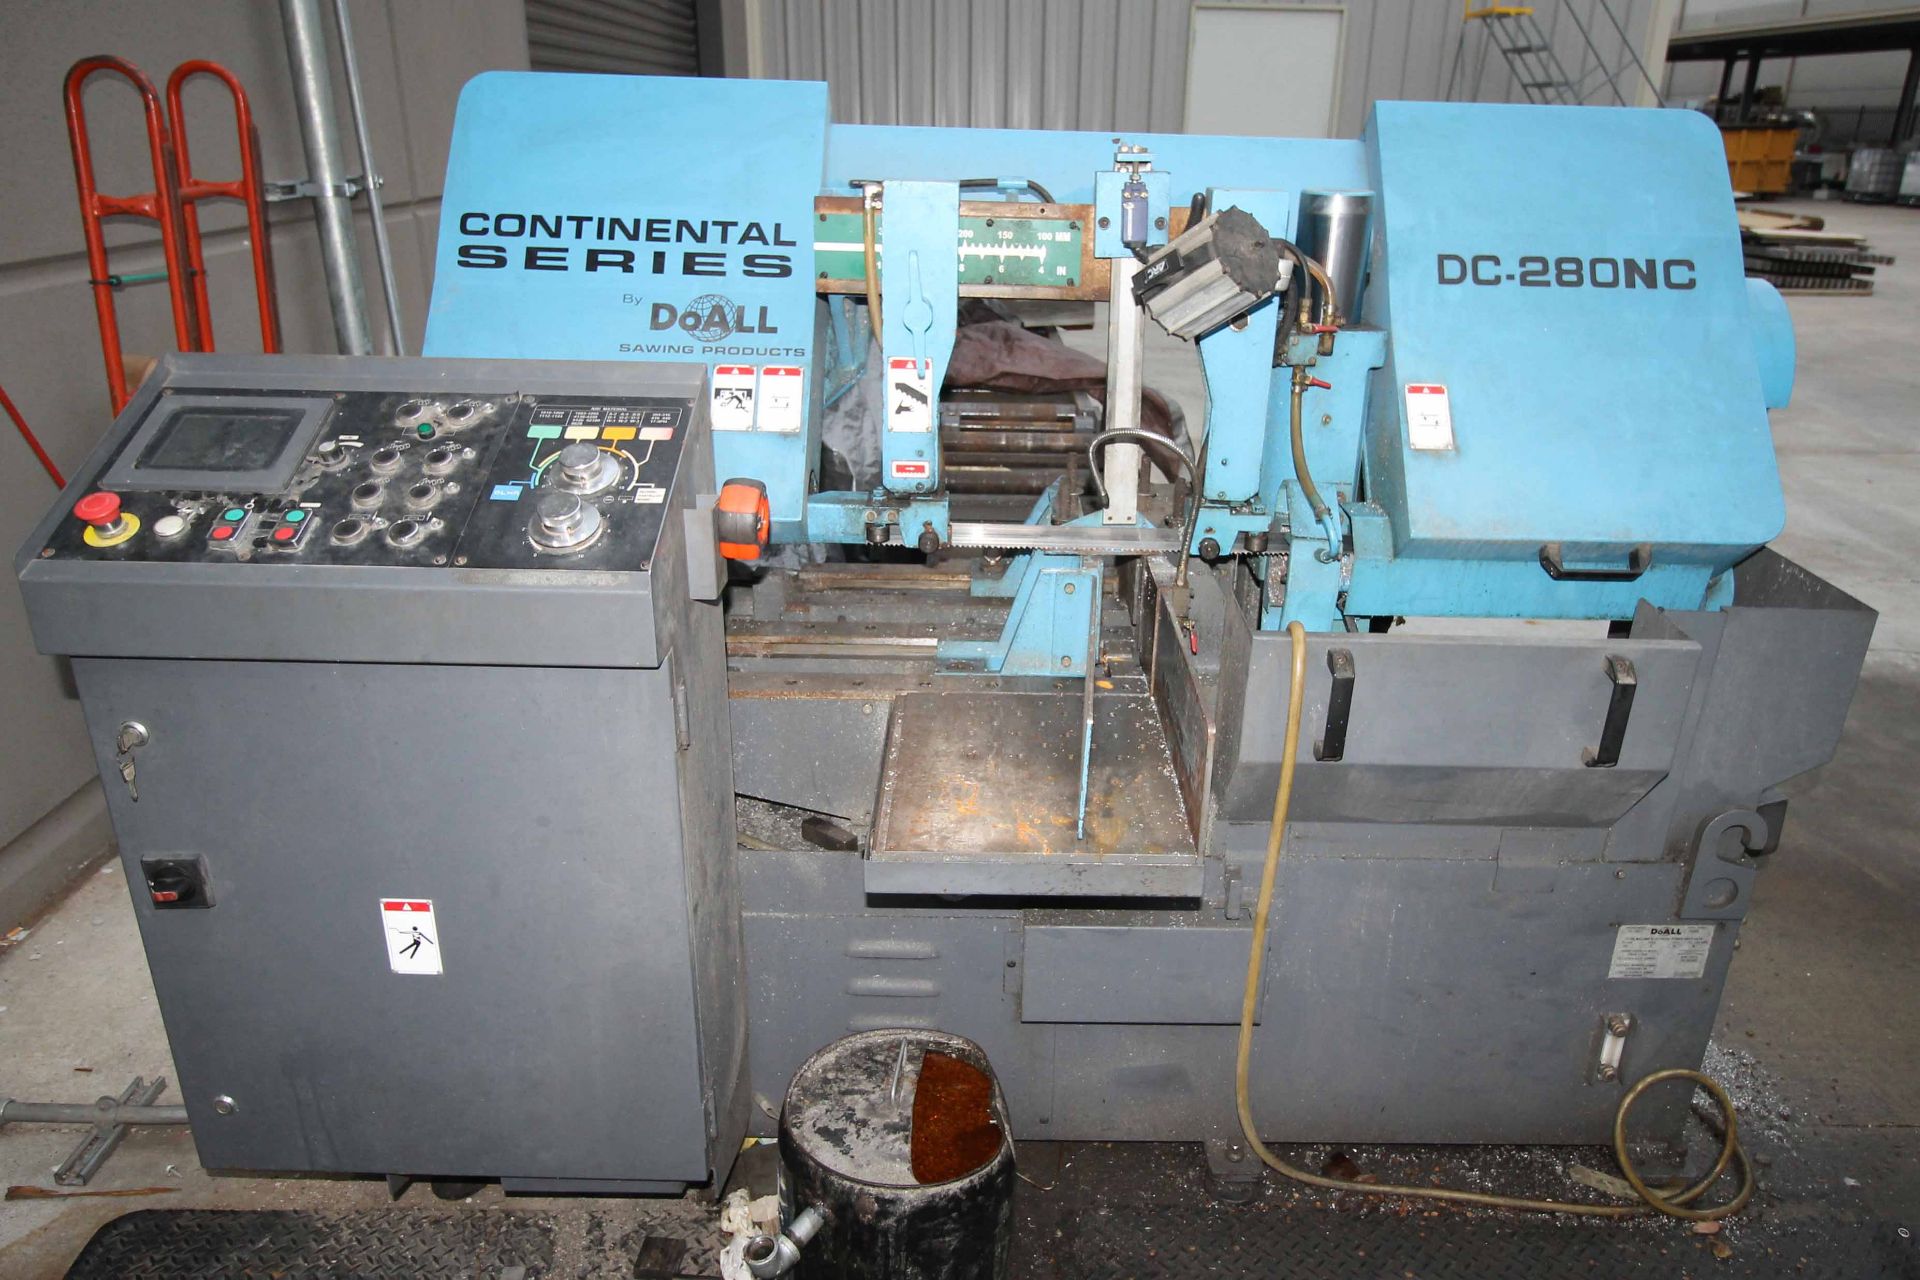 HORIZONTAL BANDSAW, DOALL CONTINENTAL SERIES MDL. DC-280NC, new 2018, 11-3/4” x 11” cap., pwr. - Image 2 of 6